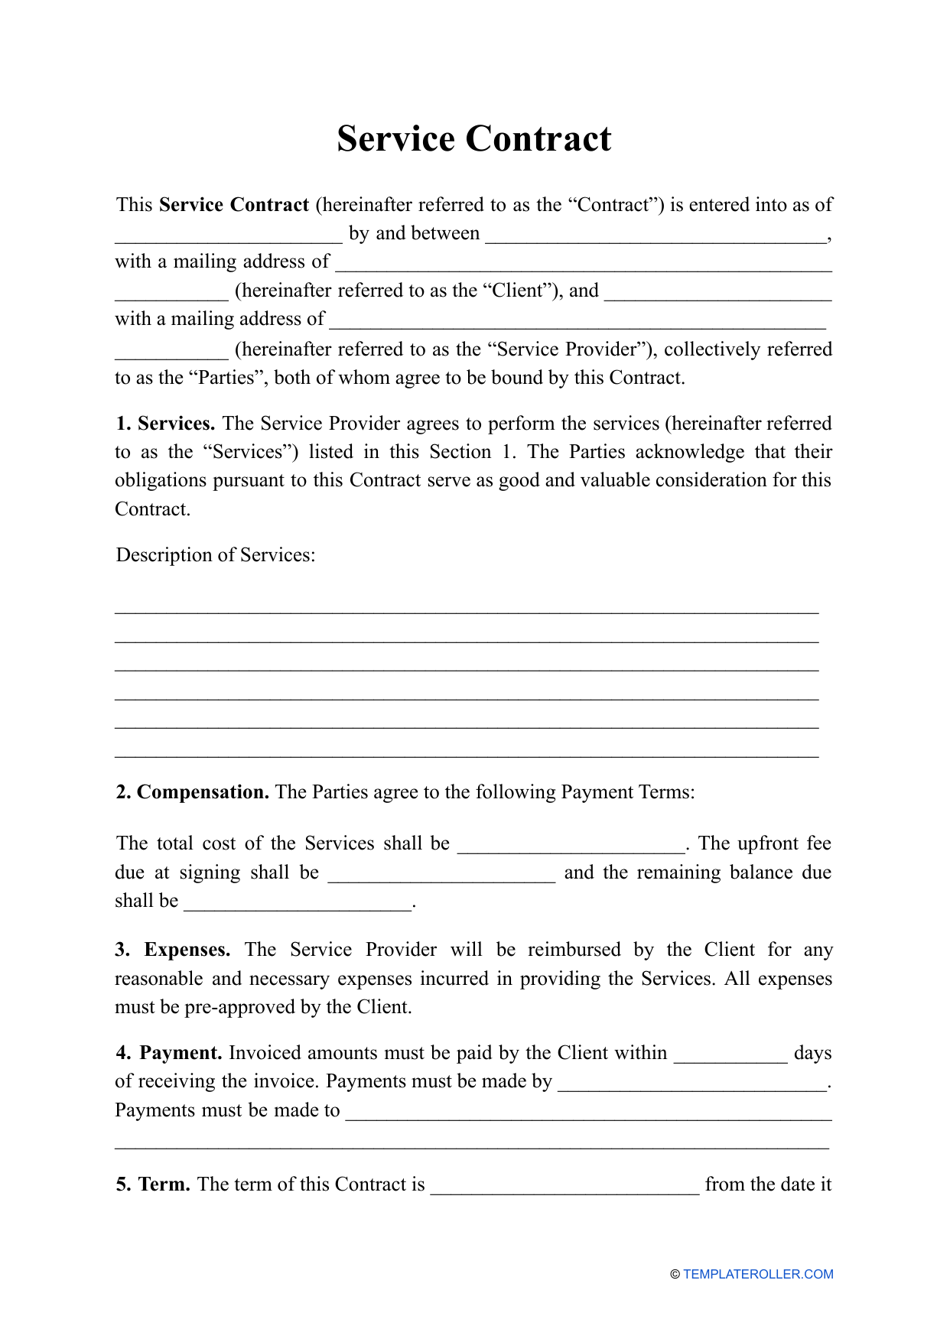 Service Contract Template, Page 1